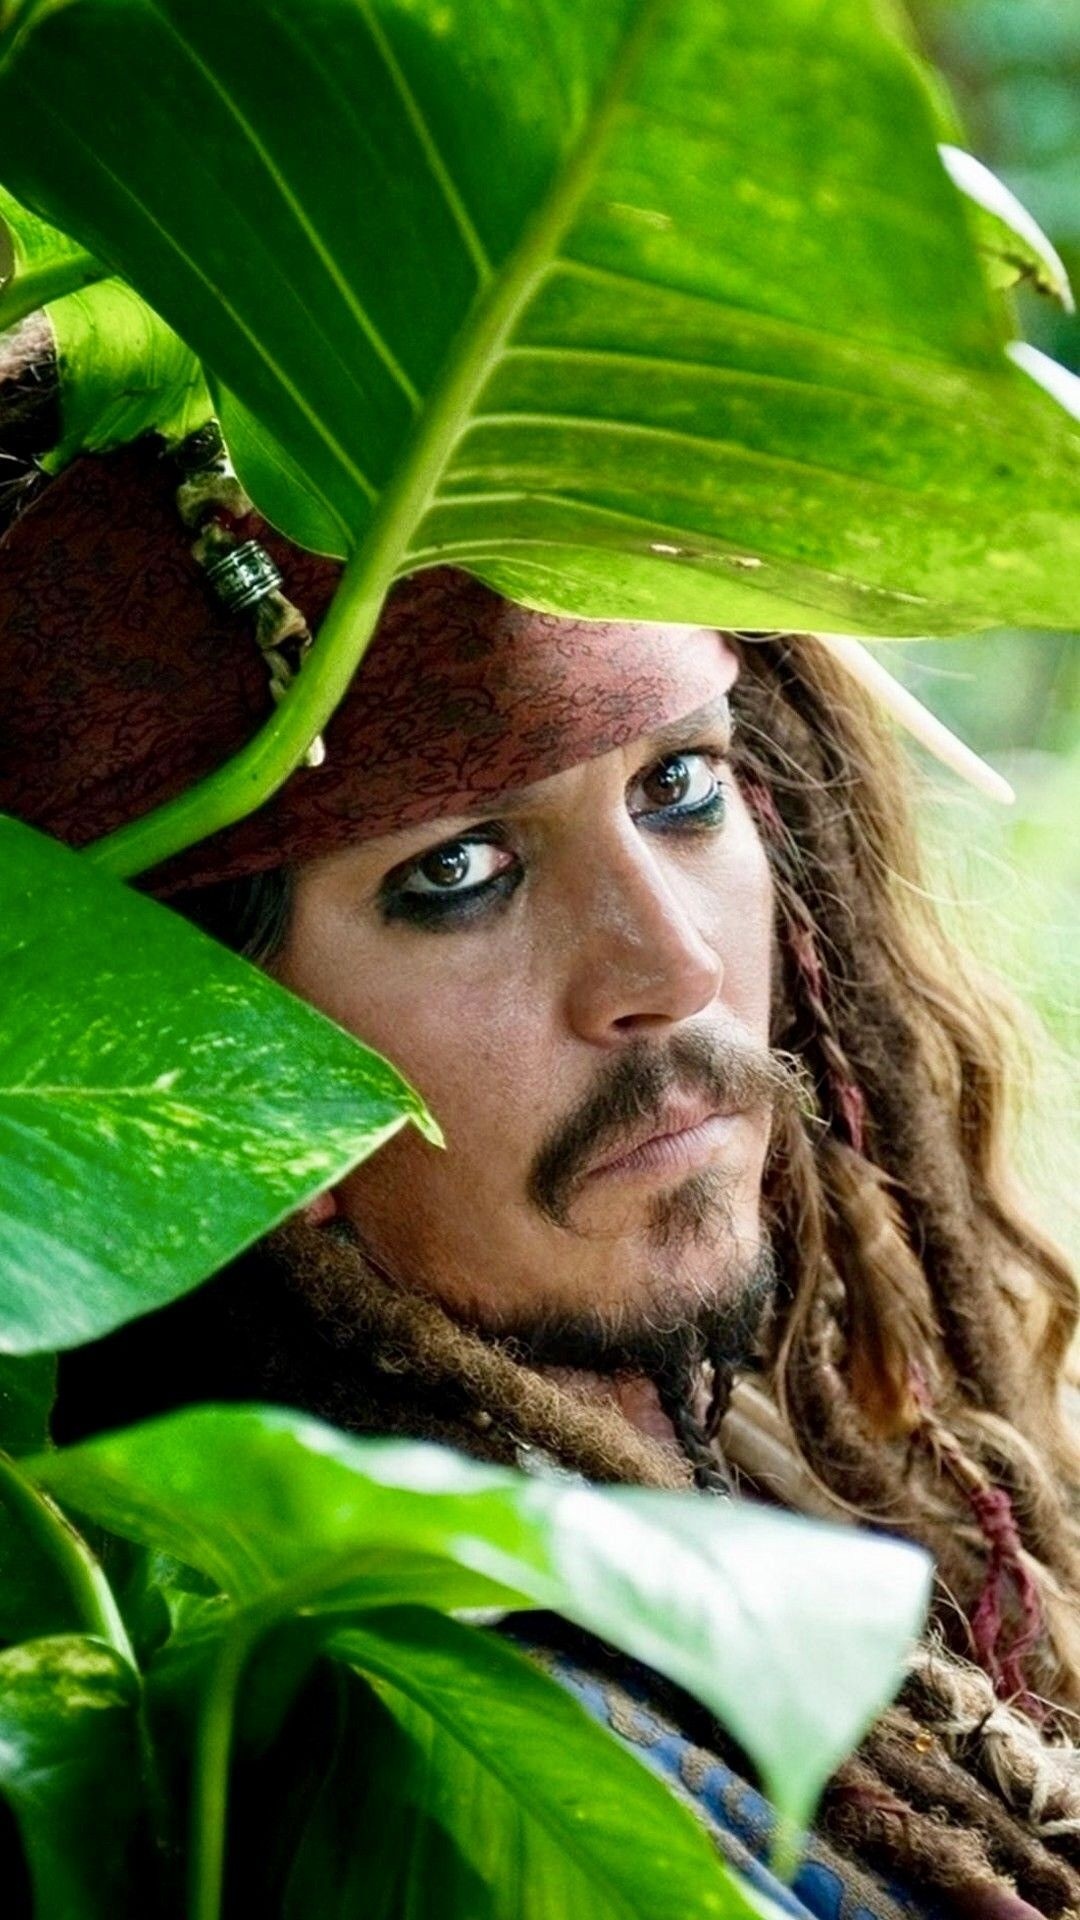 Download this wallpaper, Jack Sparrow, Captain Jack Sparrow, 1080x1920 Full HD Phone